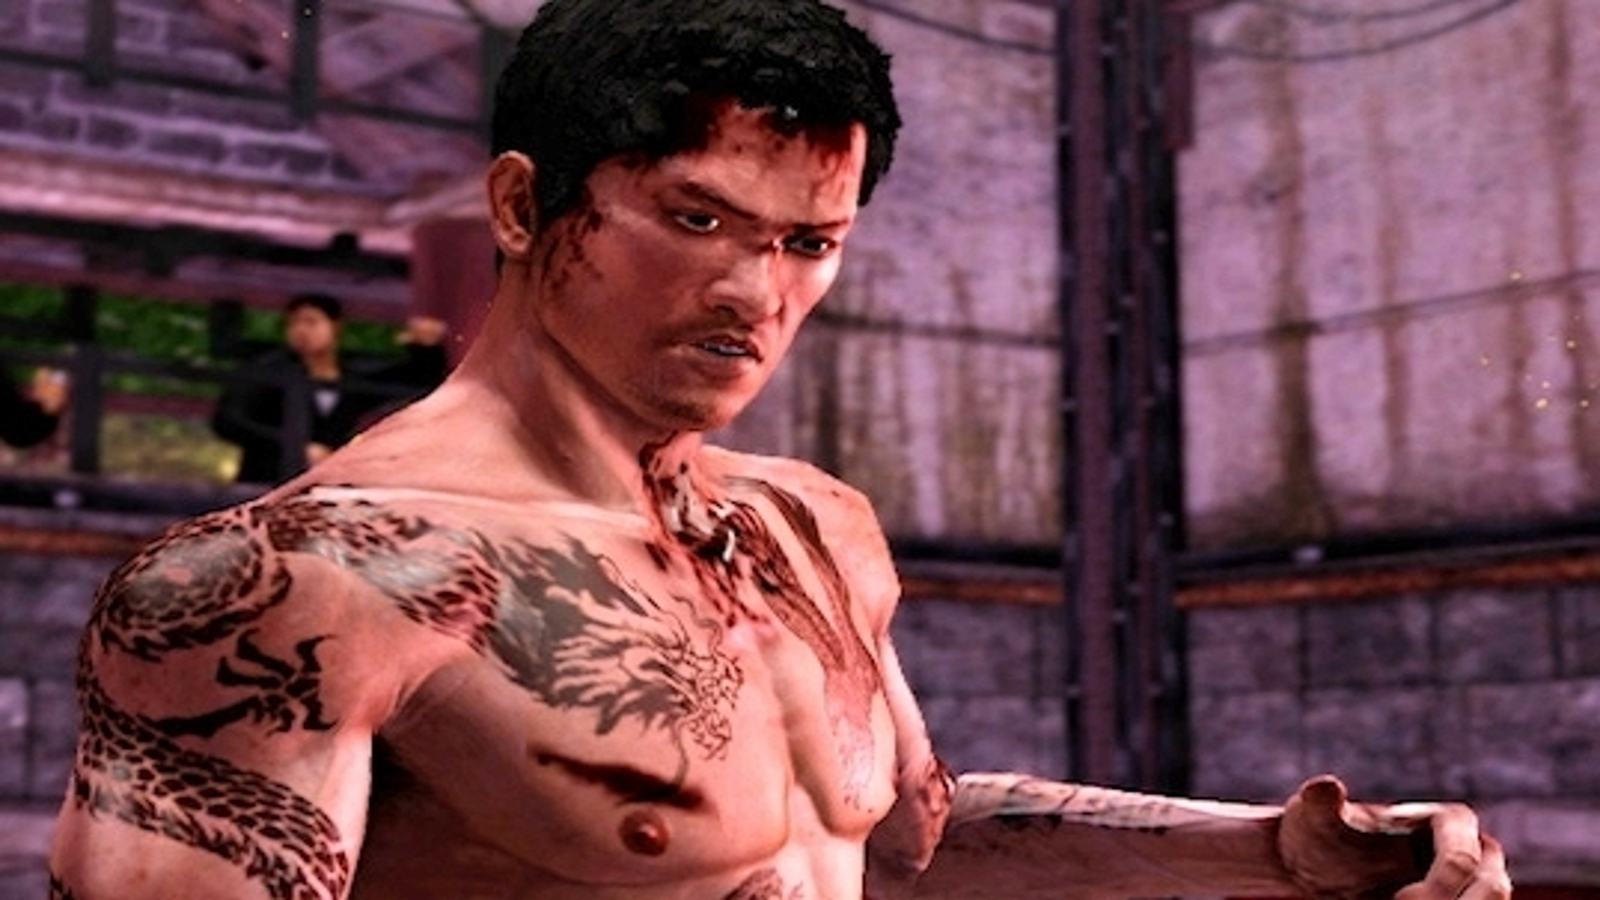 Year of the Snake DLC finally has a release date! - Sleeping Dogs